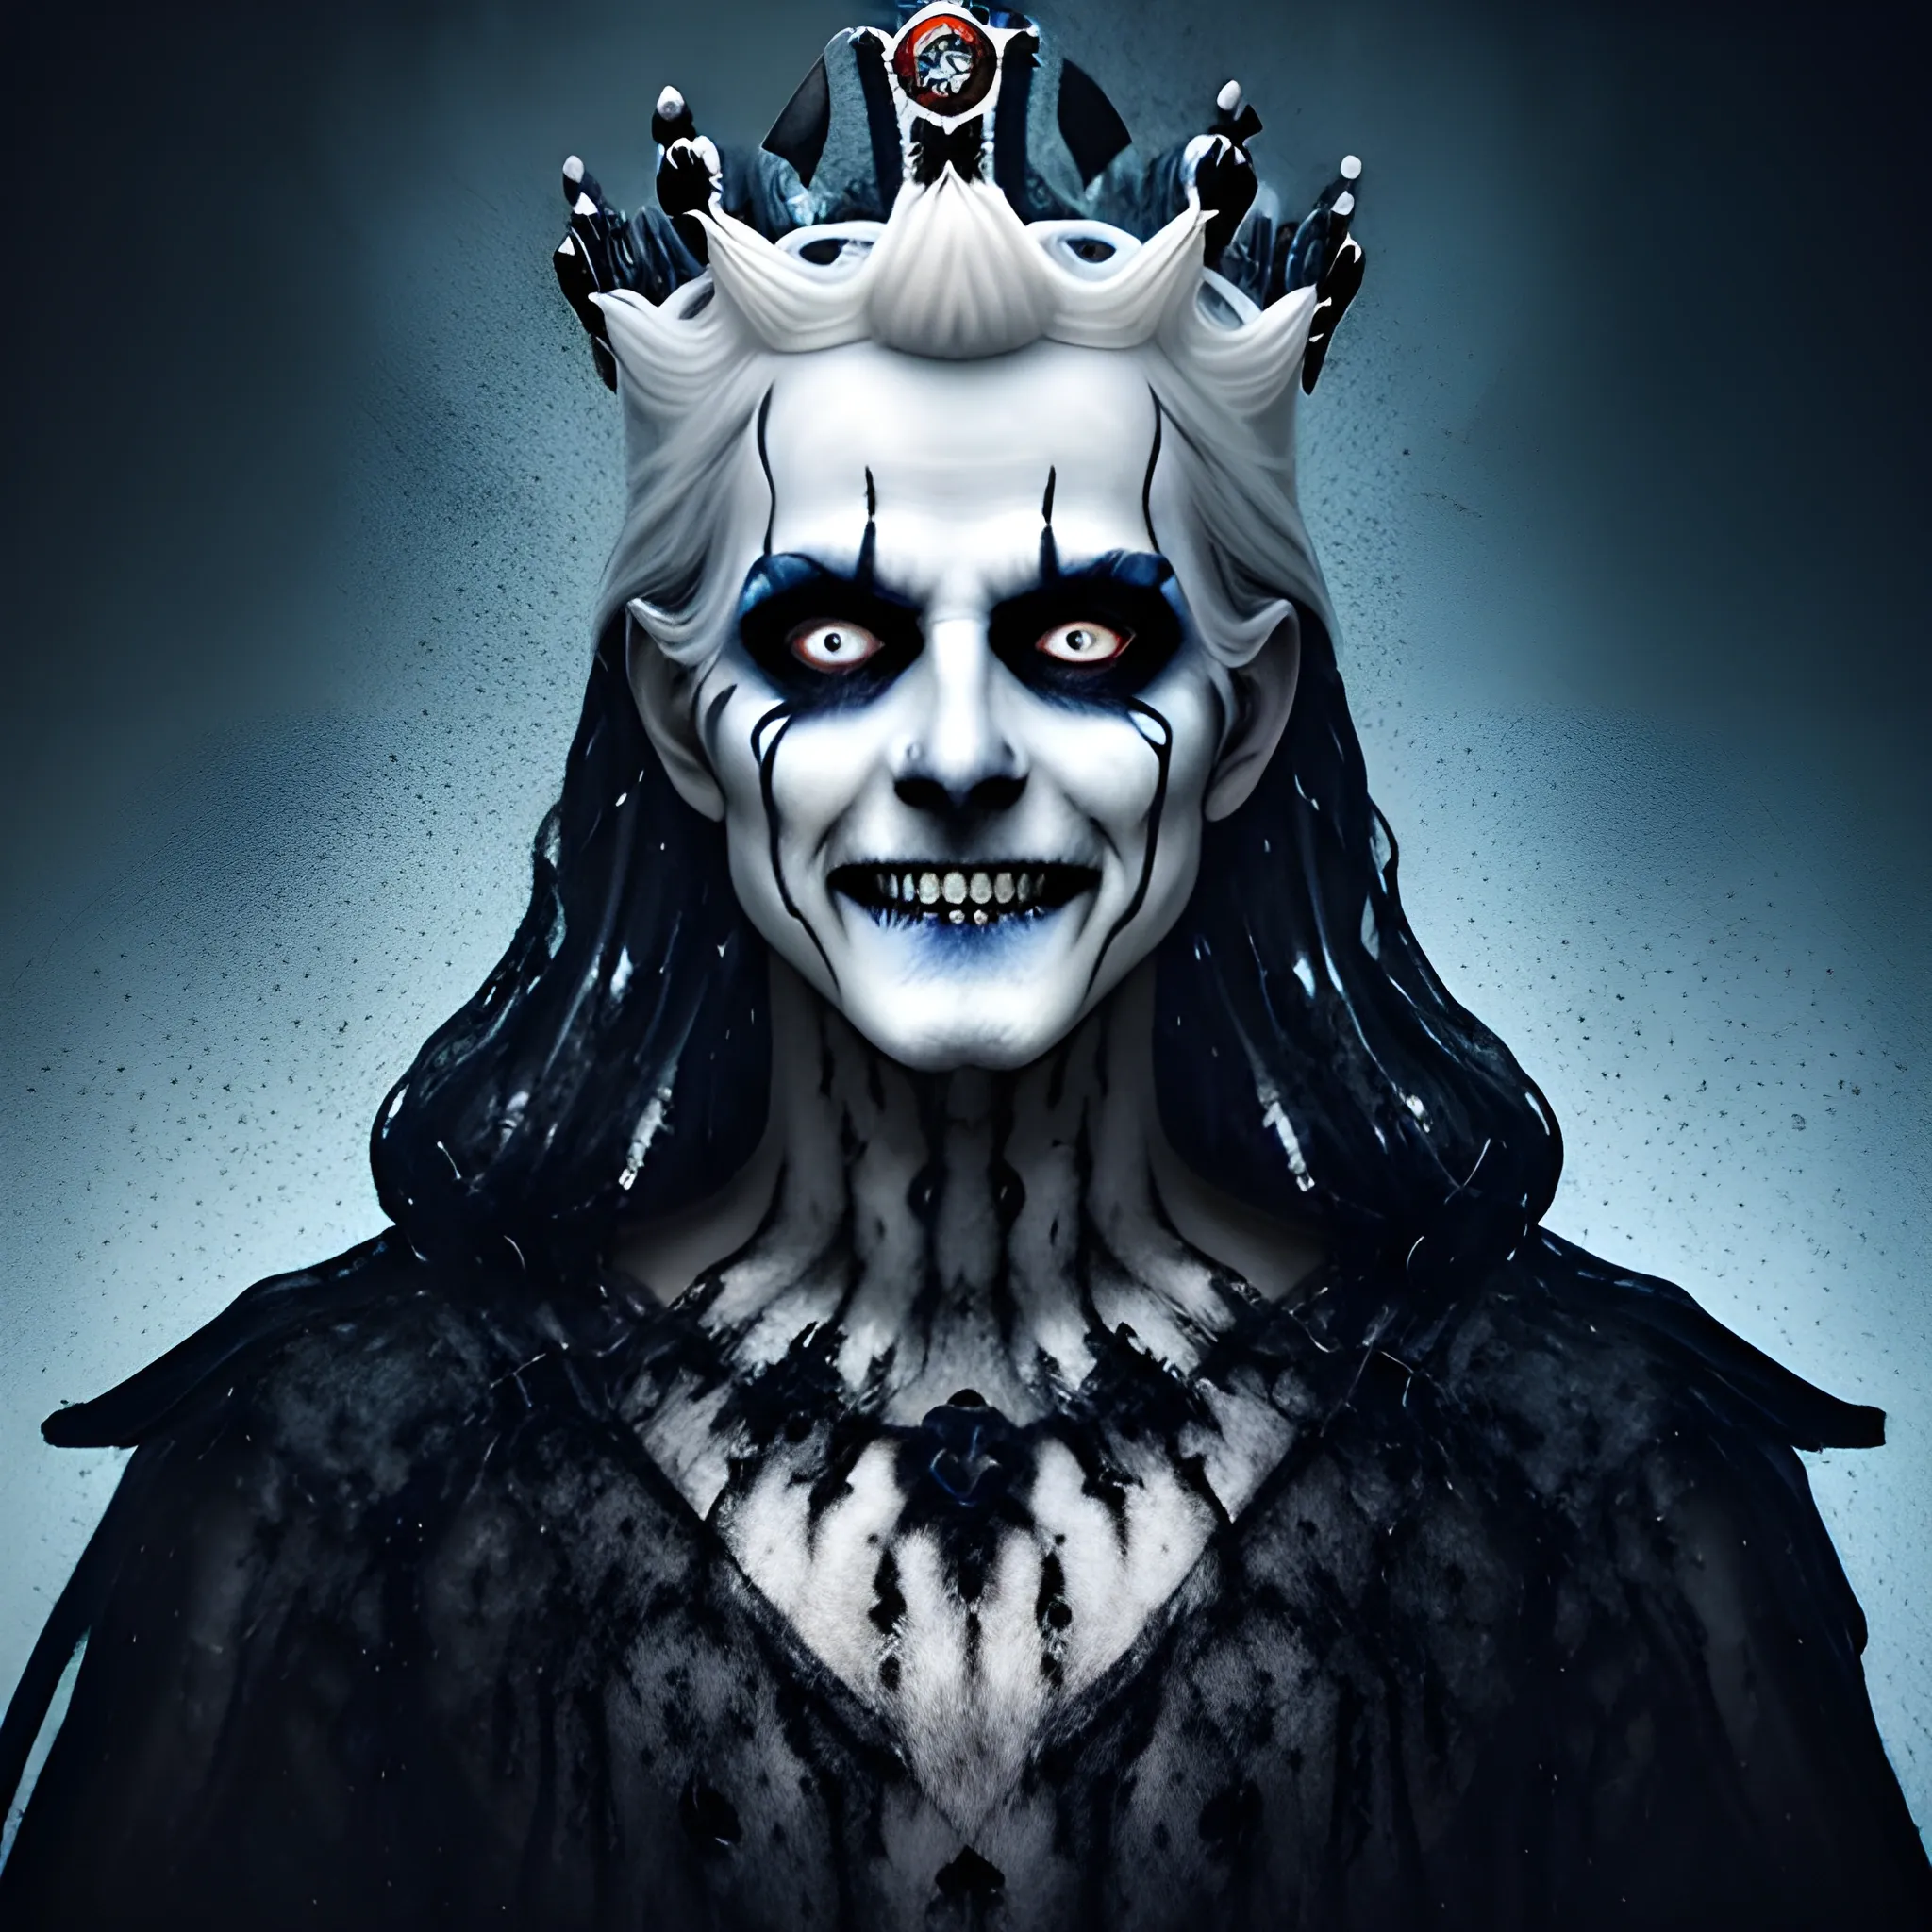 photorealistic image of the king of ghosts  with a black crown, full body, ominous smile, dimmed lighting, blue painted wet hair, wet makeup, evil grim, bokeh lighting